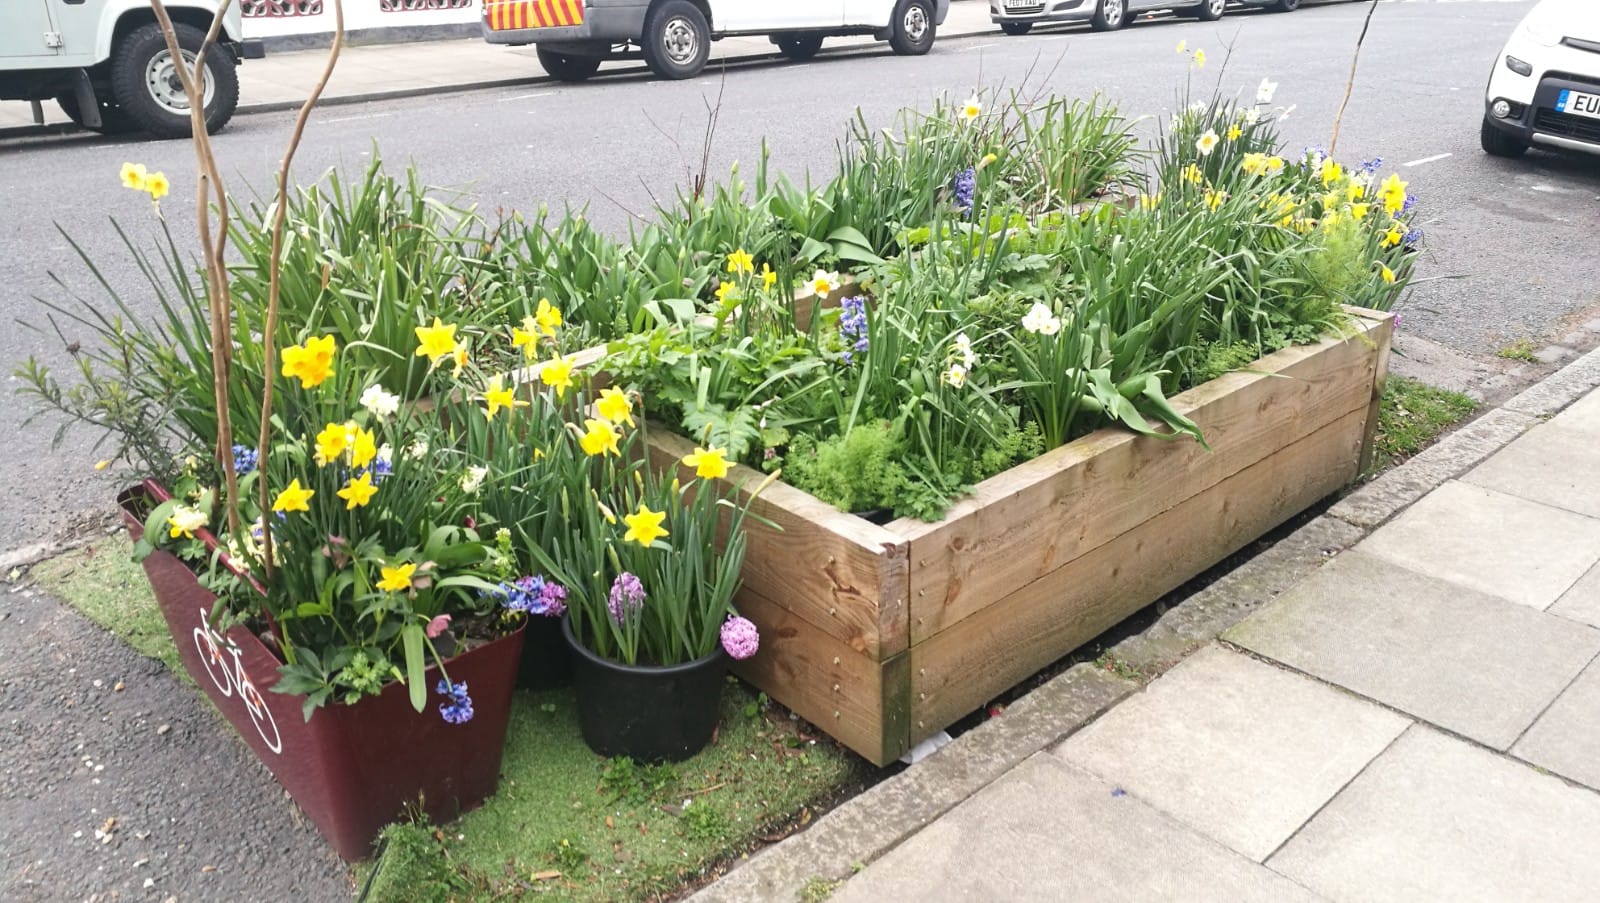 Parklet in a former parking space. Lots of flowers blooming, including yellow daffodils.